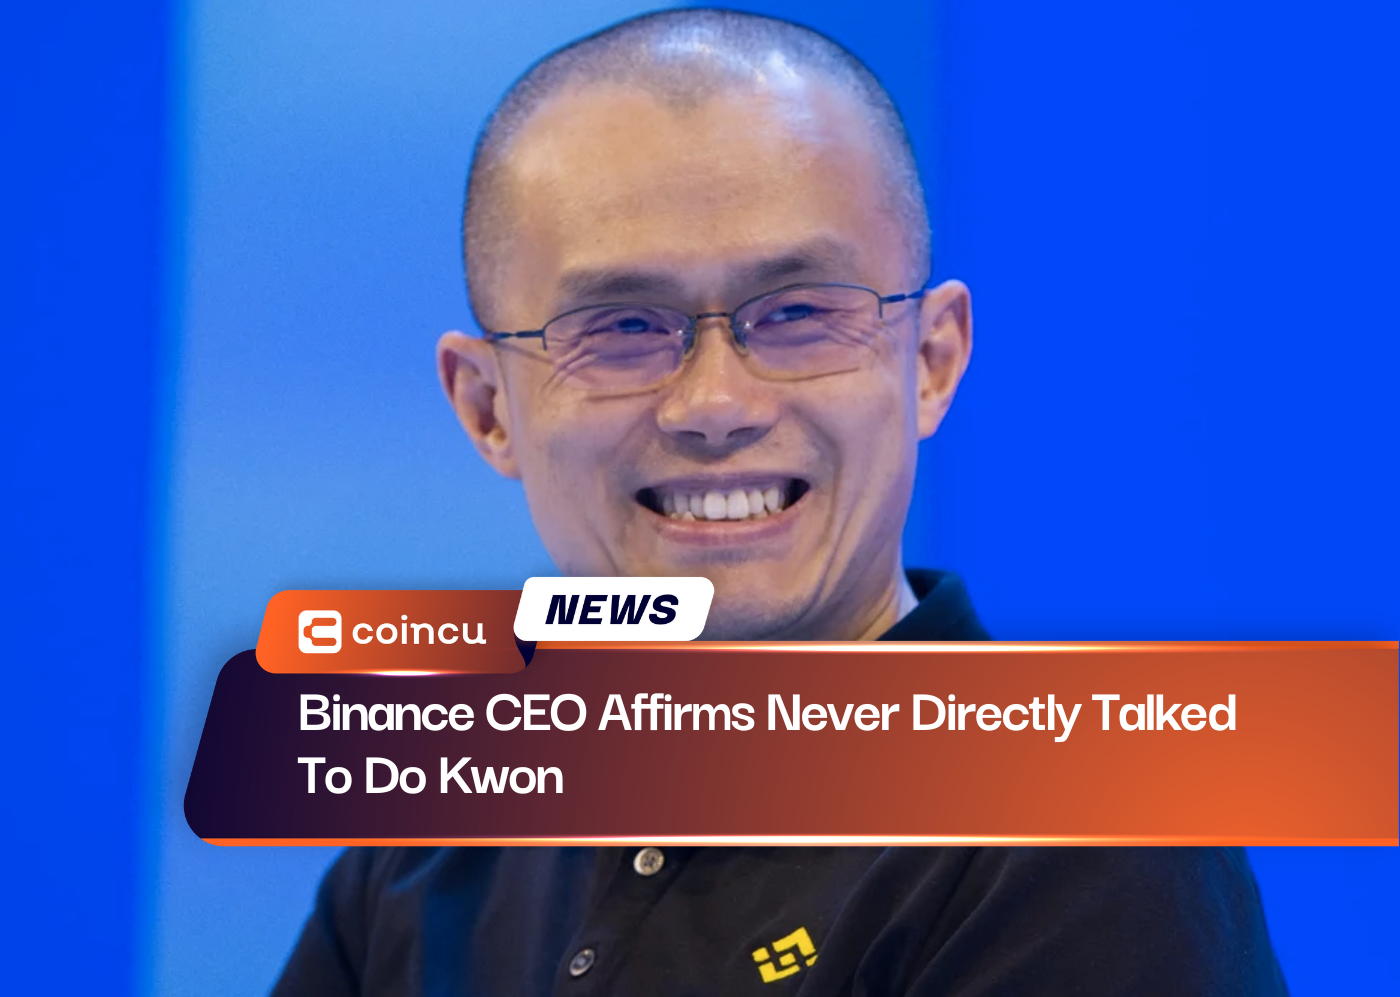 Binance CEO Affirms Never Directly Talked To Do Kwon